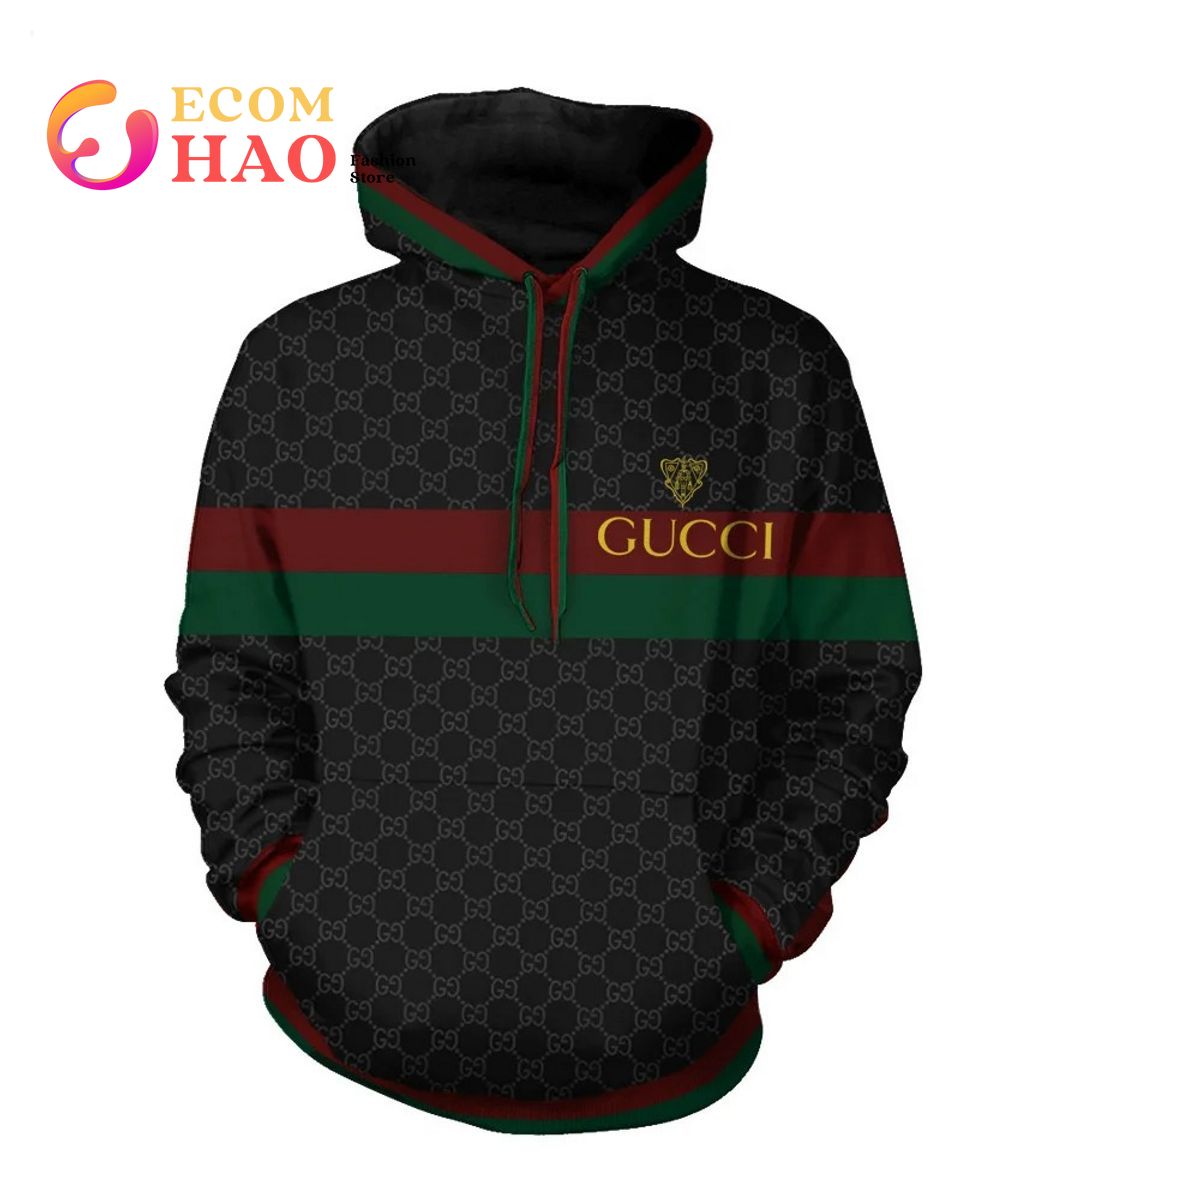 Gucci 3D Hoodie Black - Ecomhao Store